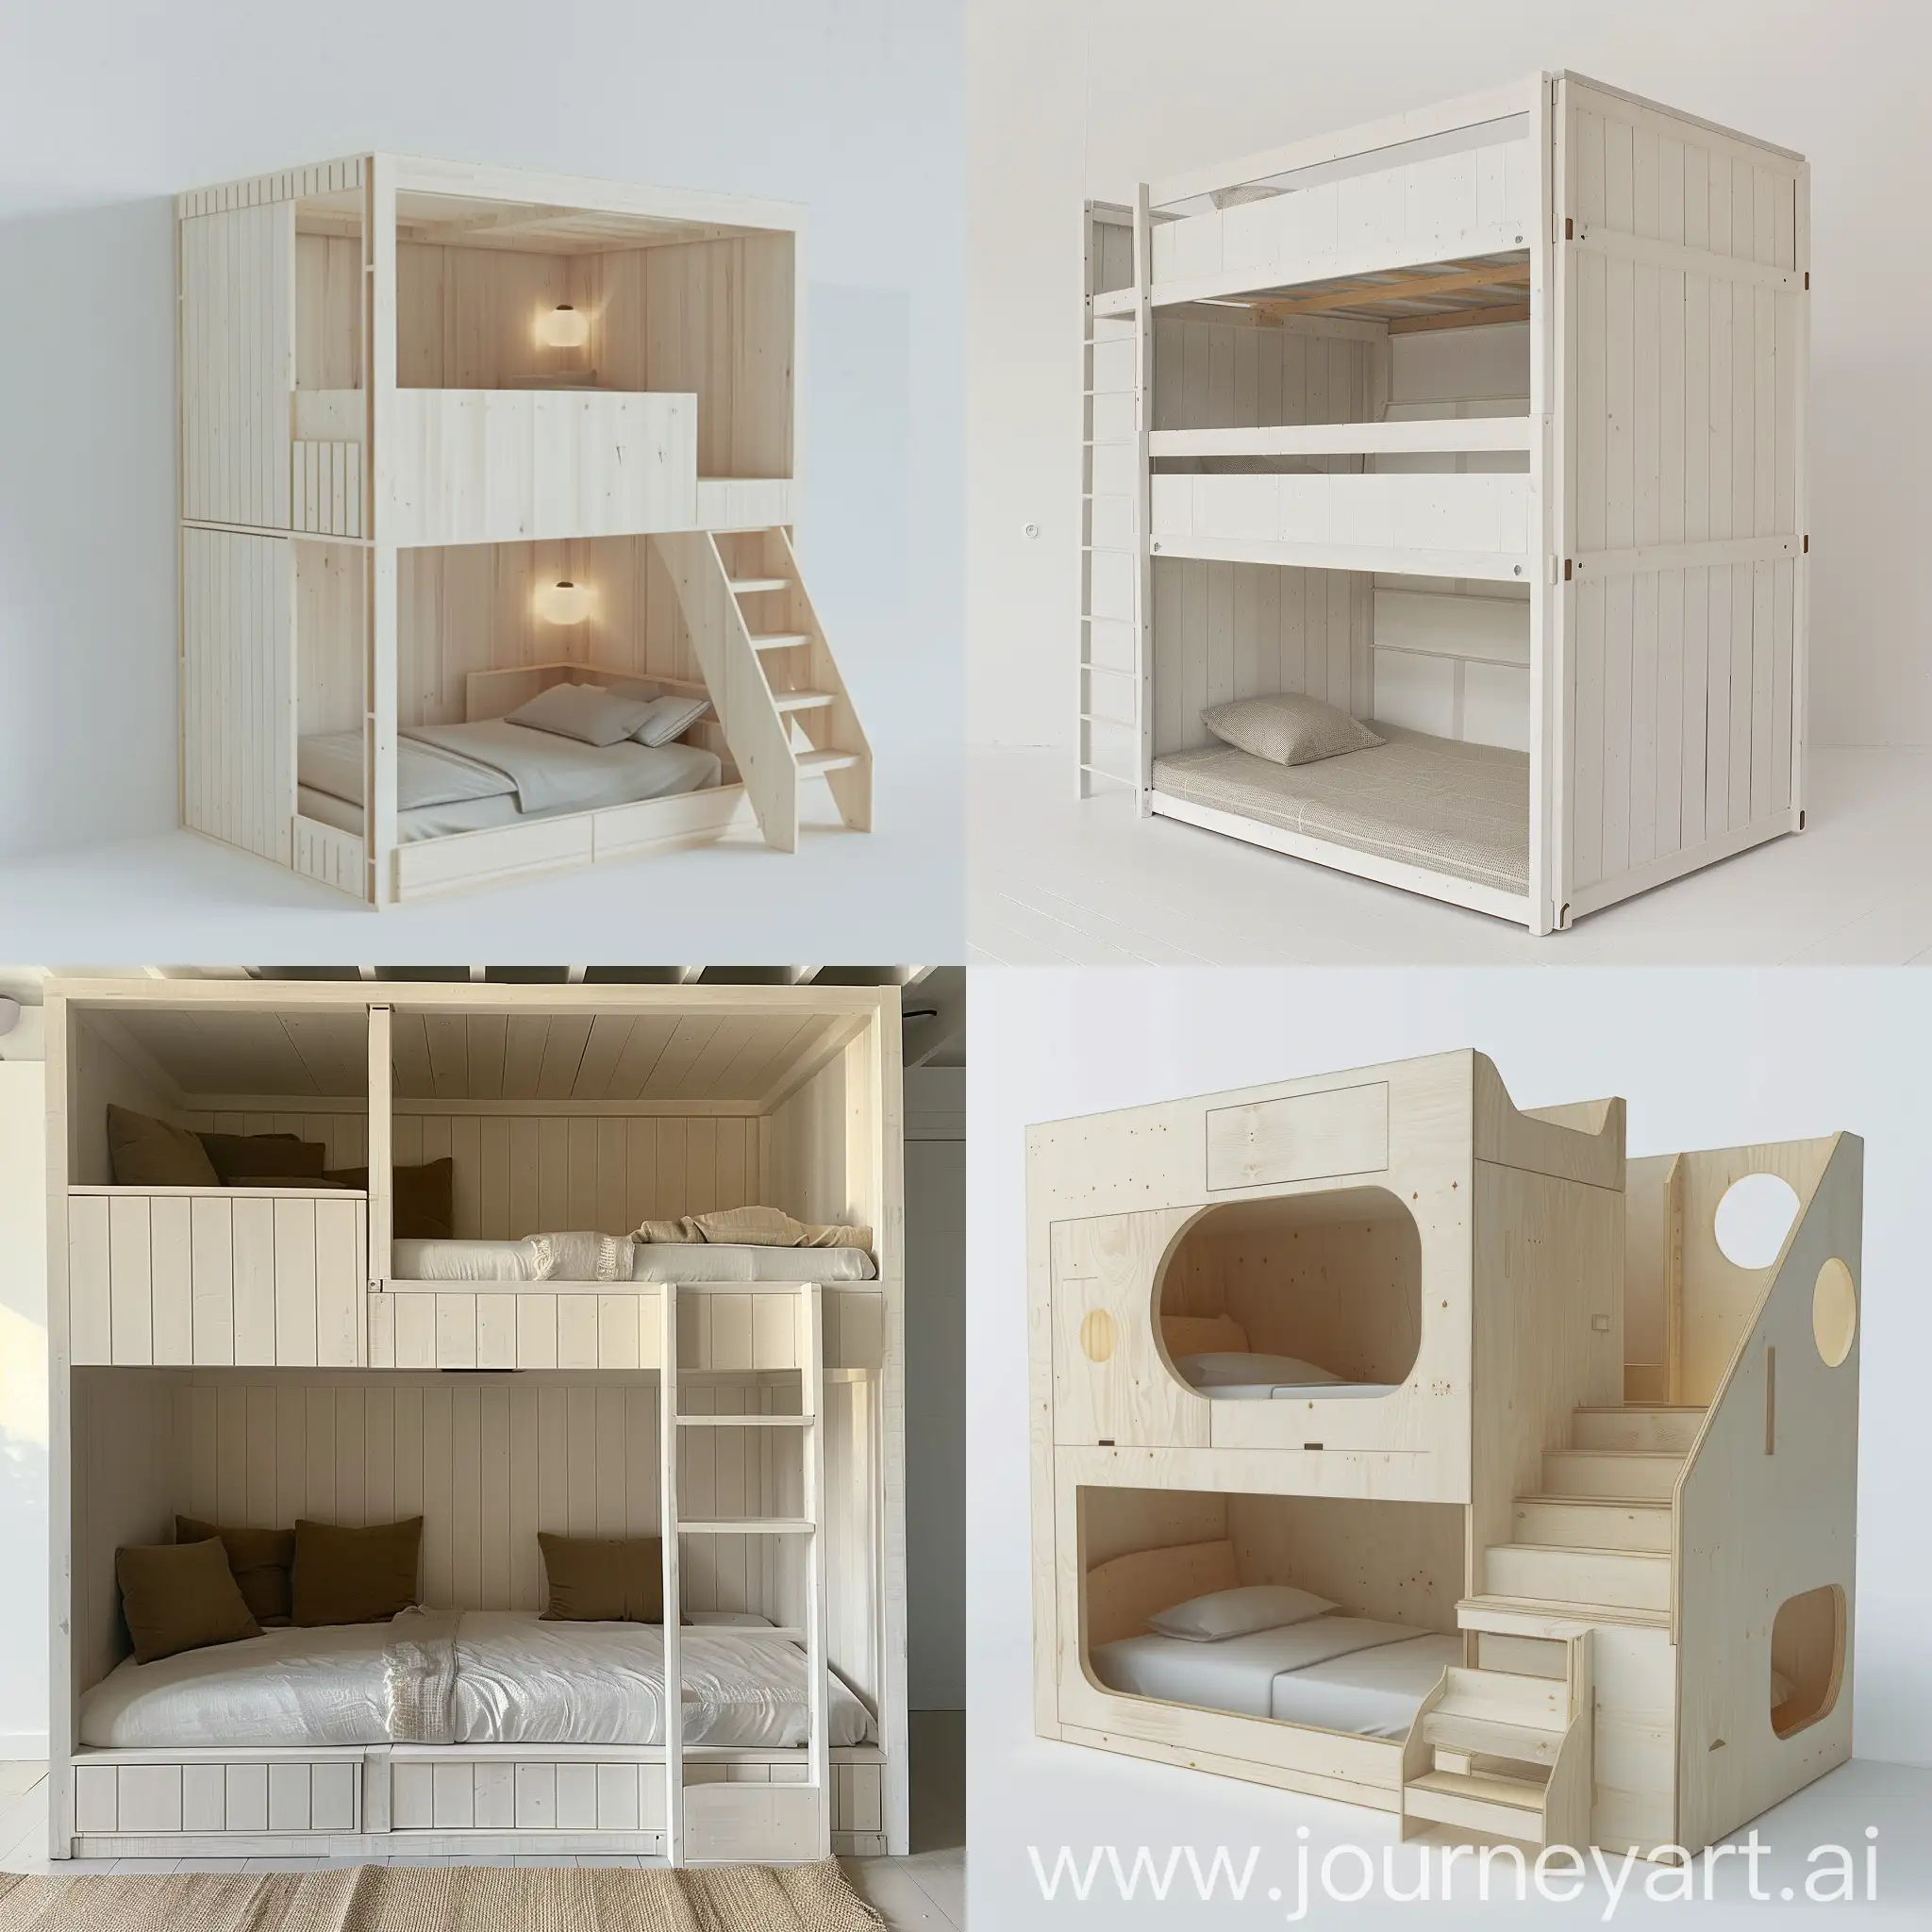 Design a closed unit with dimensions of 2.5 meters long, 1 meter wide and 3 meters high, made of white wood. It contains an upper bed and a lower bed. It serves the youth group.